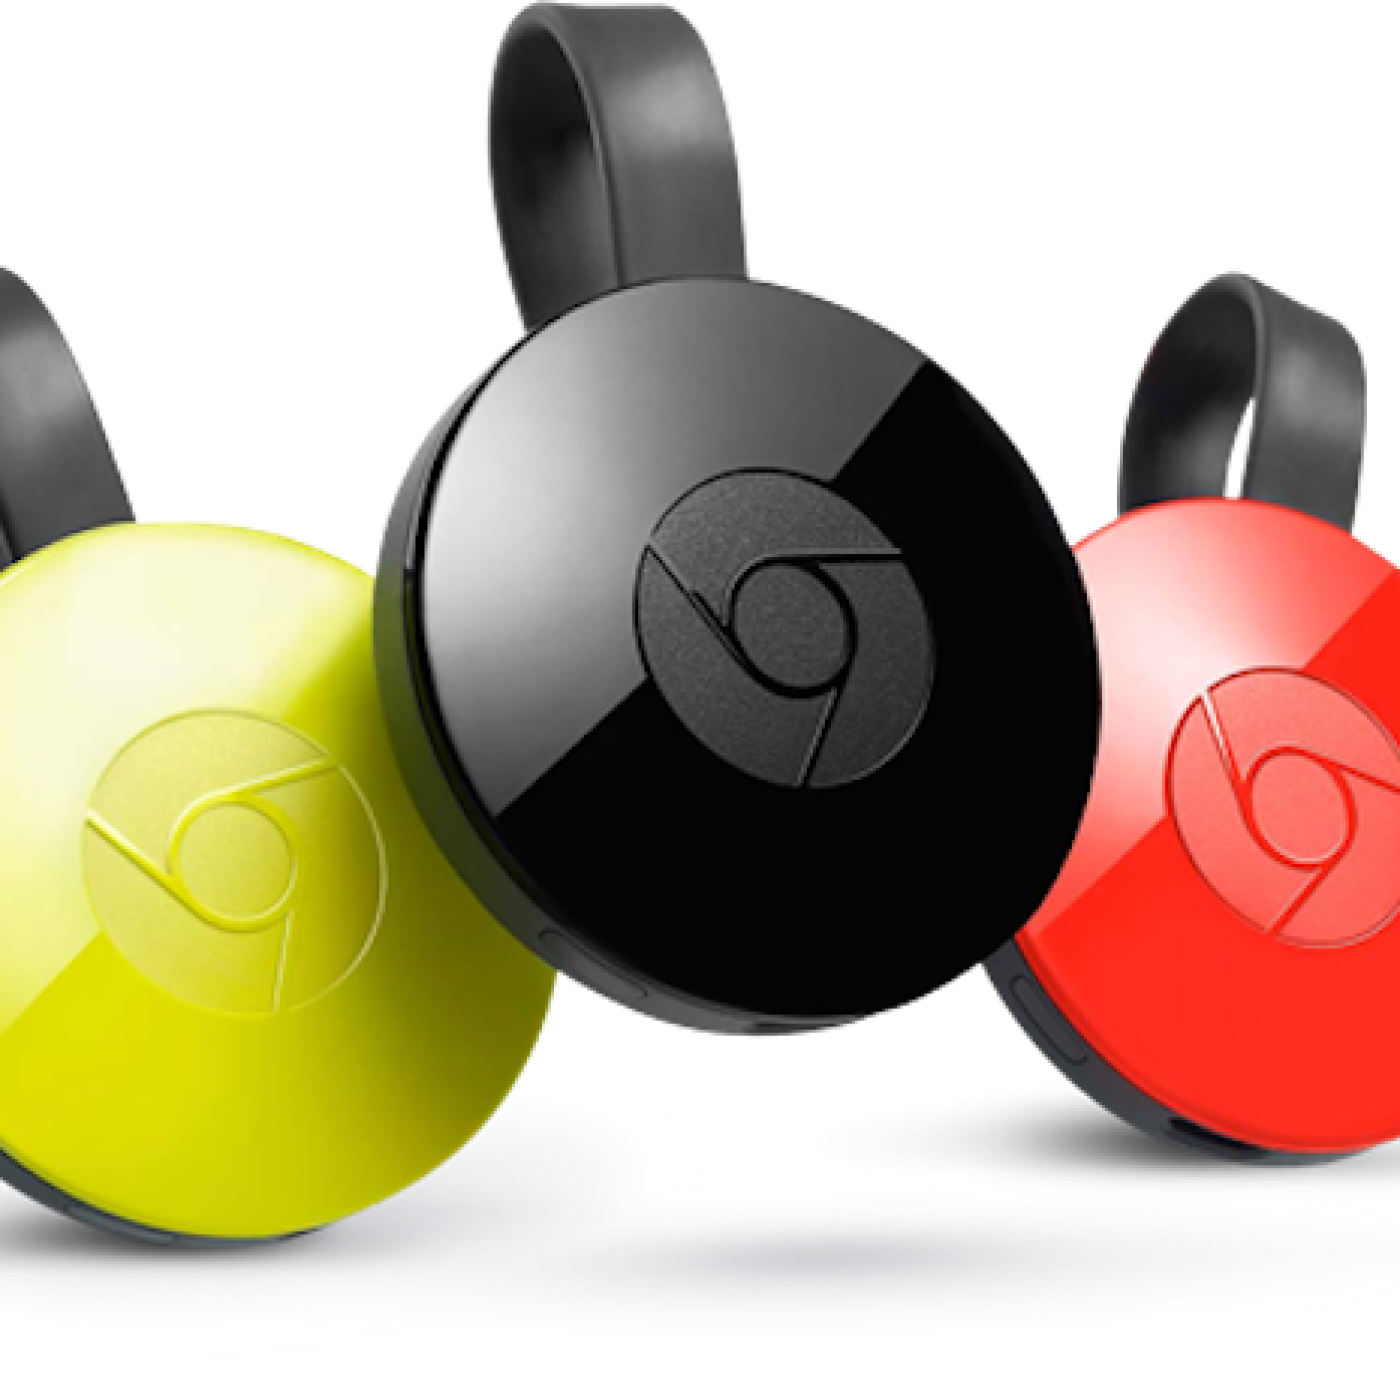 Google is giving Chromecasts to YouTube subscribers